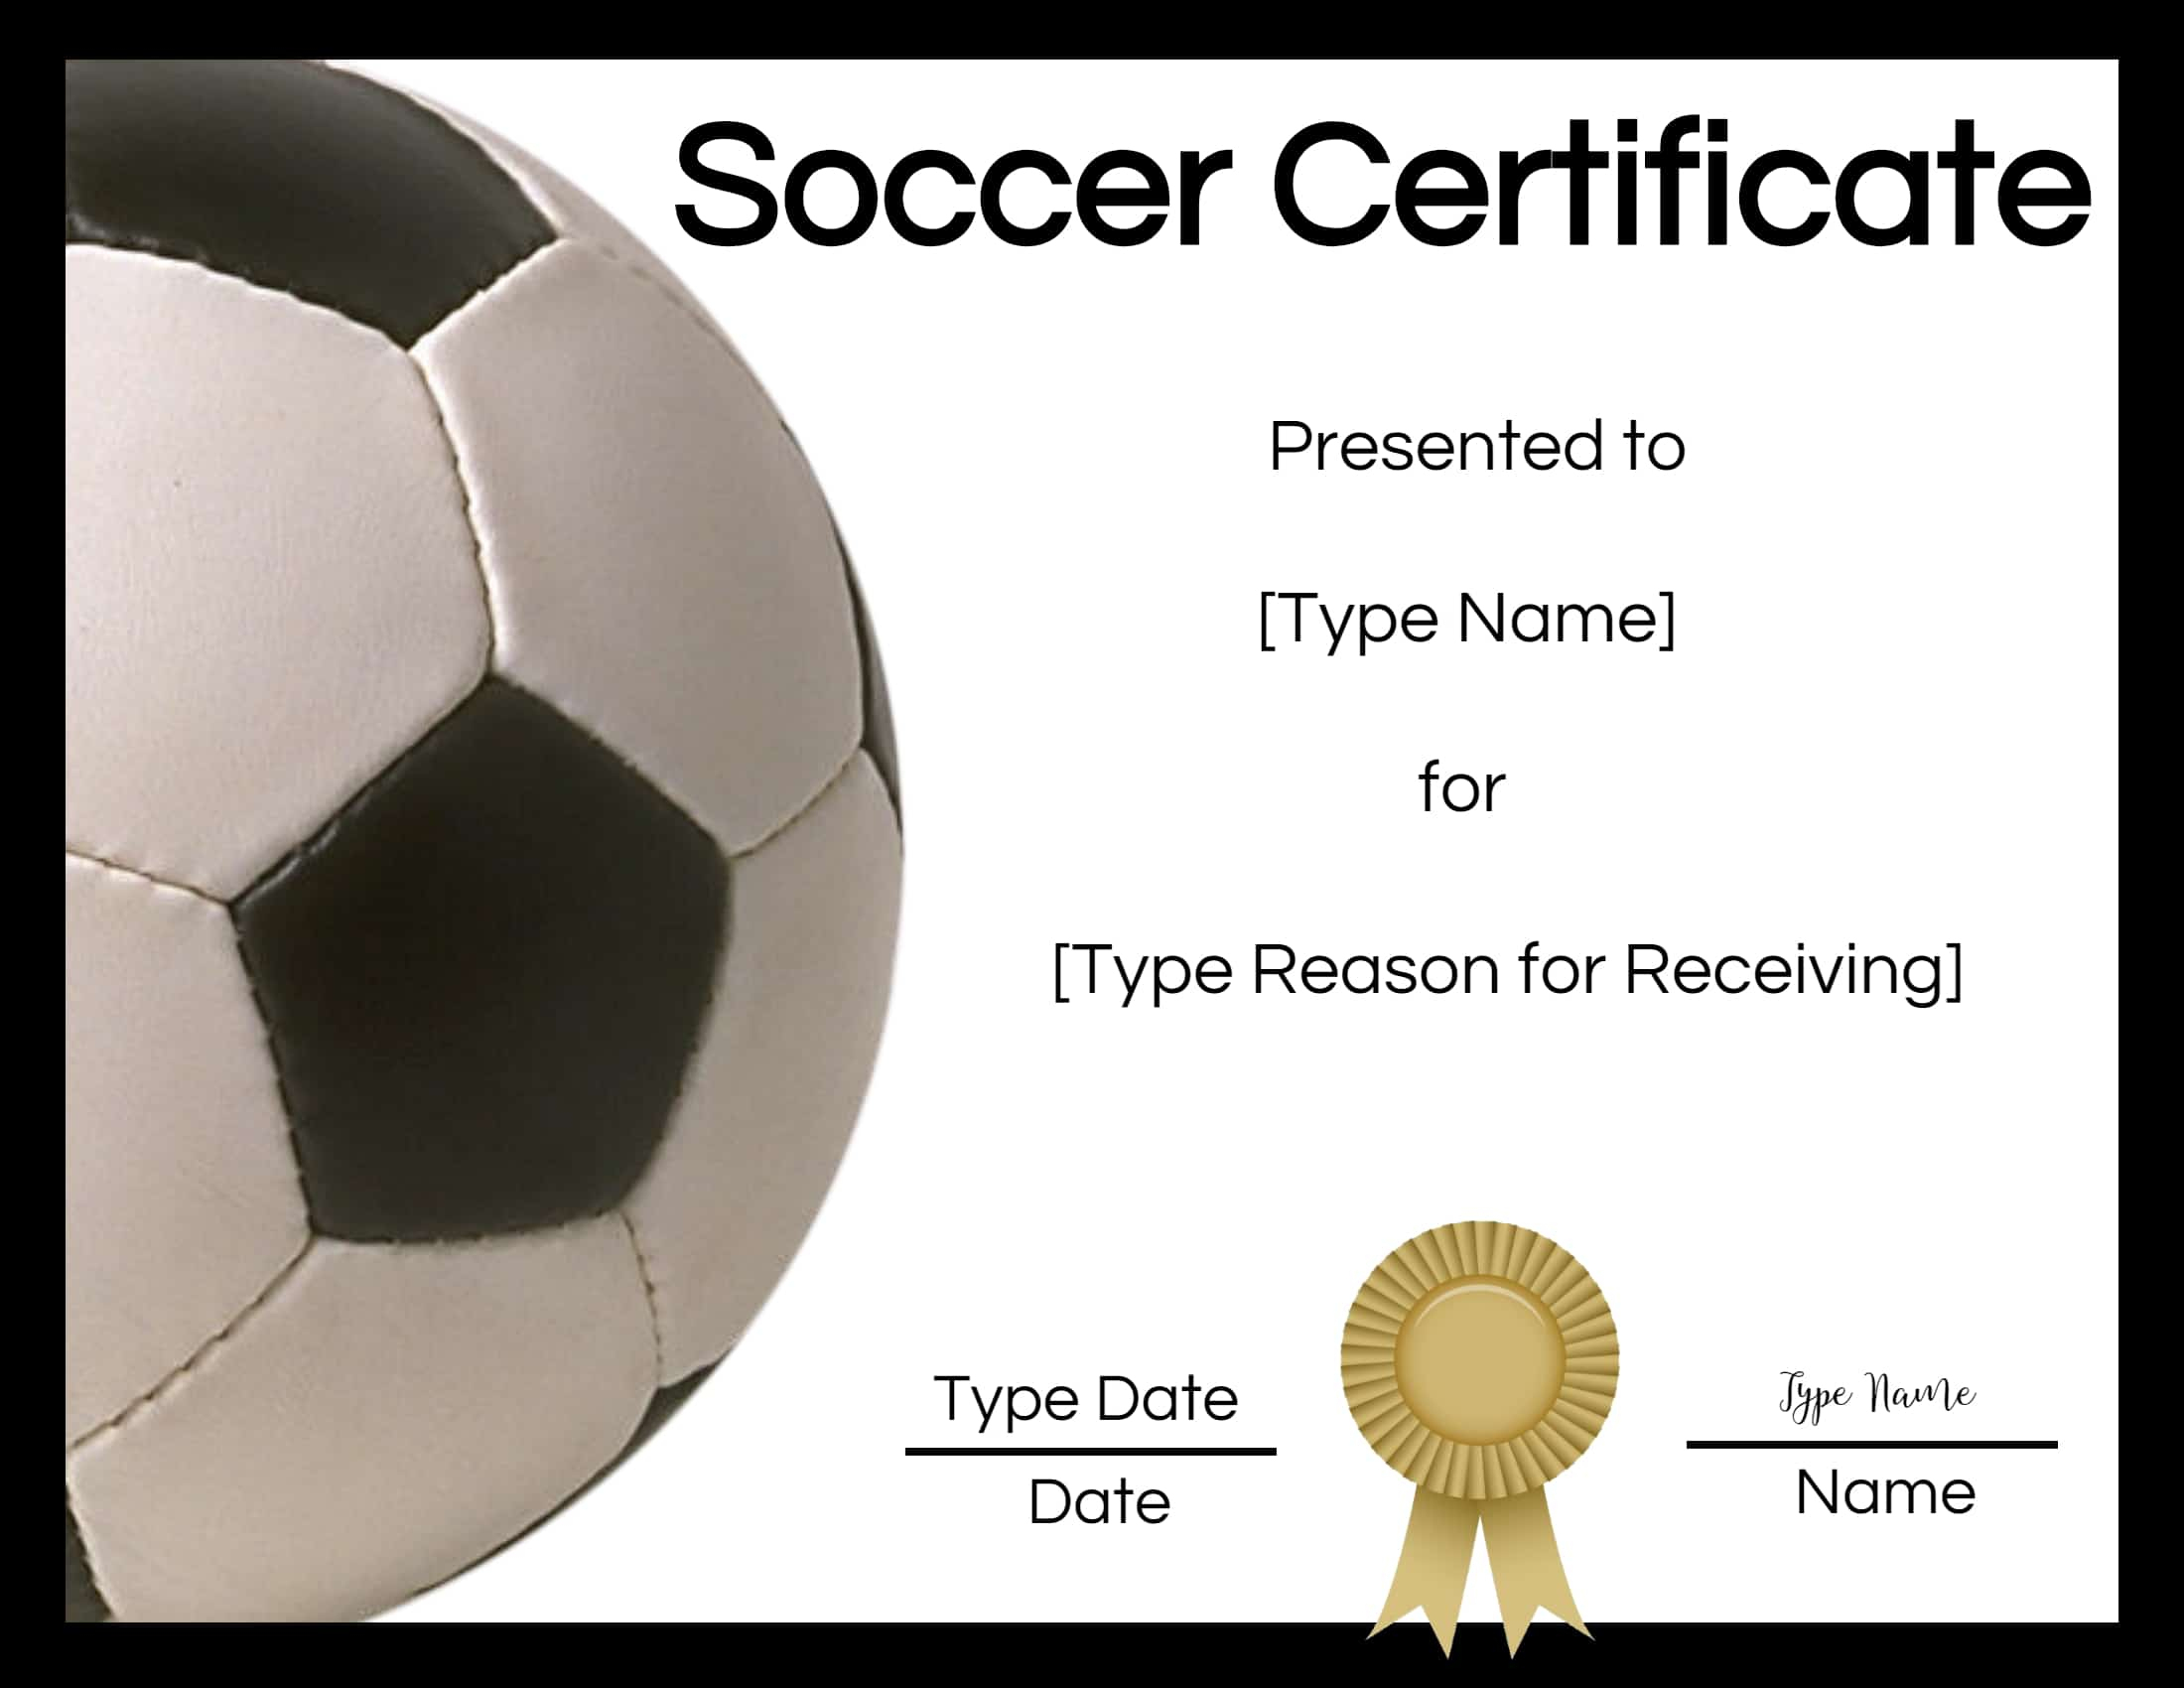 Free Soccer Certificate Maker | Edit Online And Print At Home - Free Soccer Award Certificates Printable